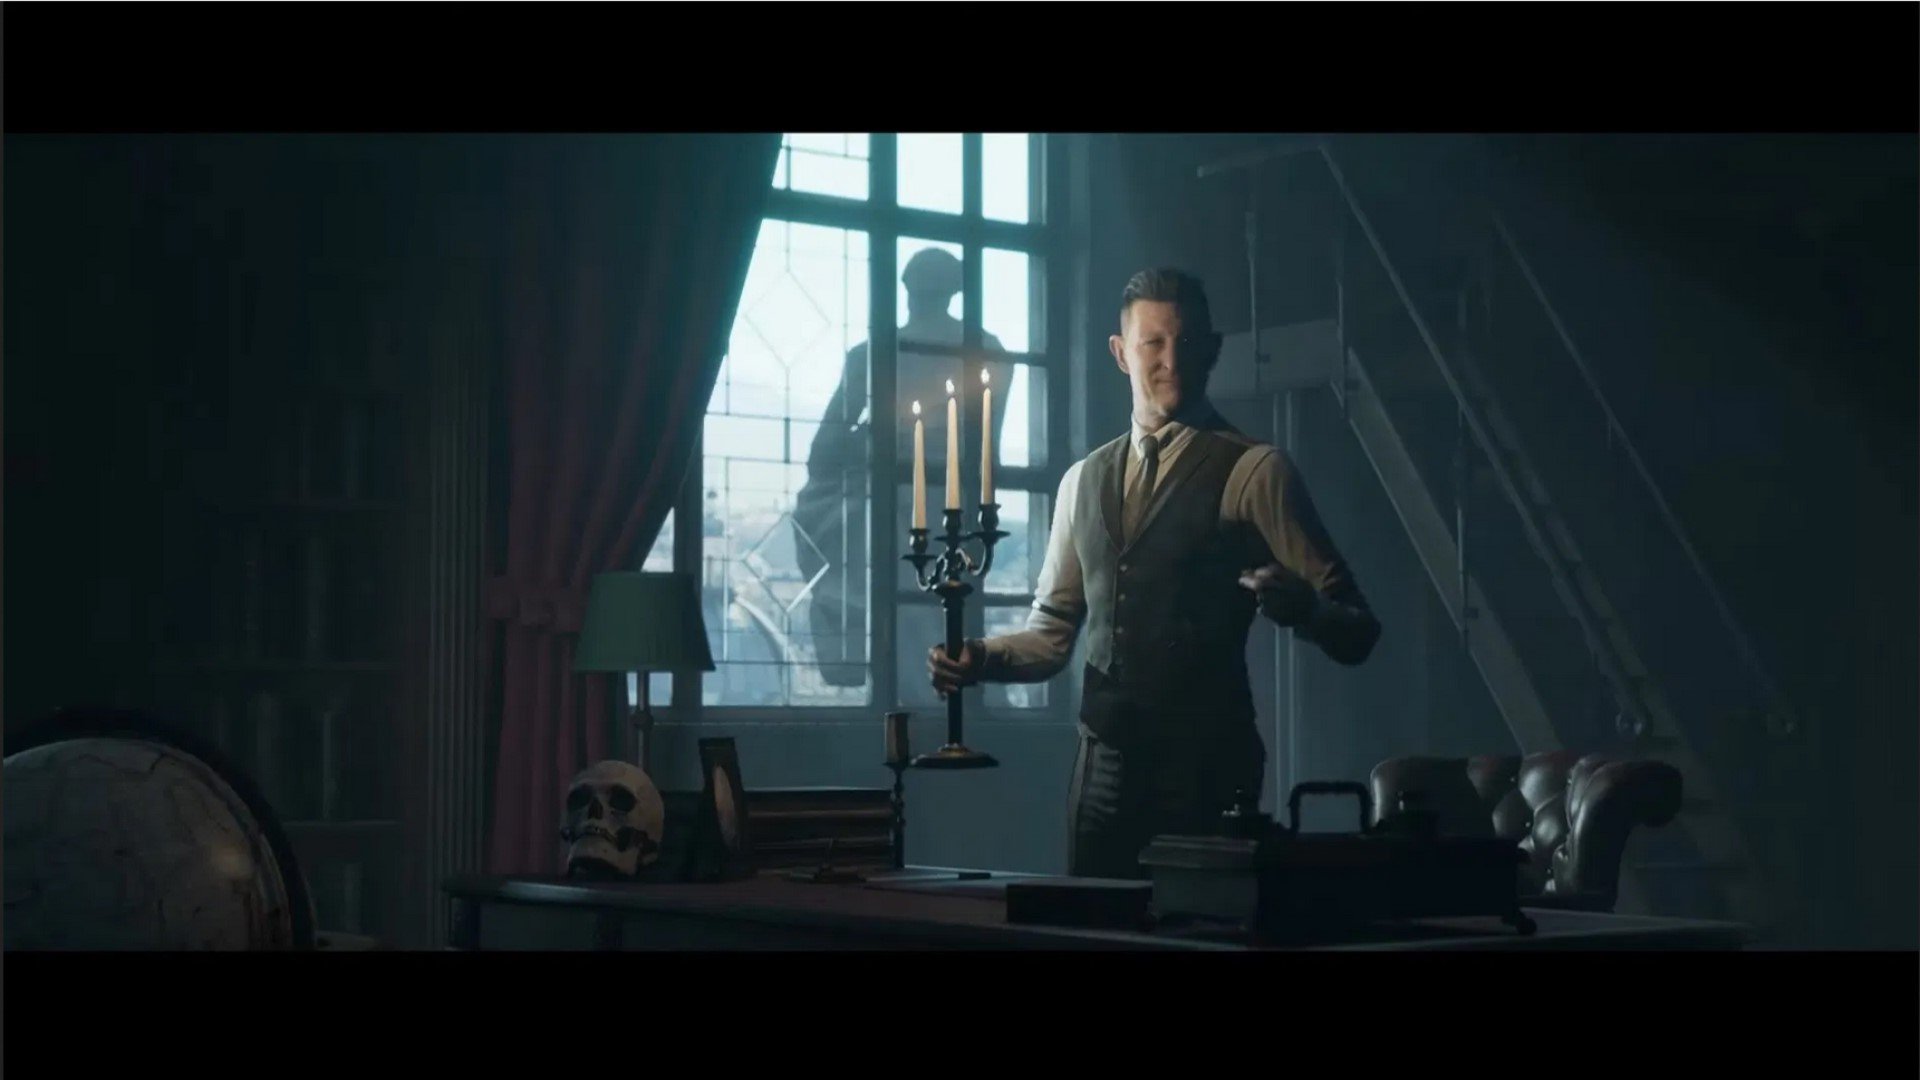 A posh, well-dressed older man lighting candles in his study